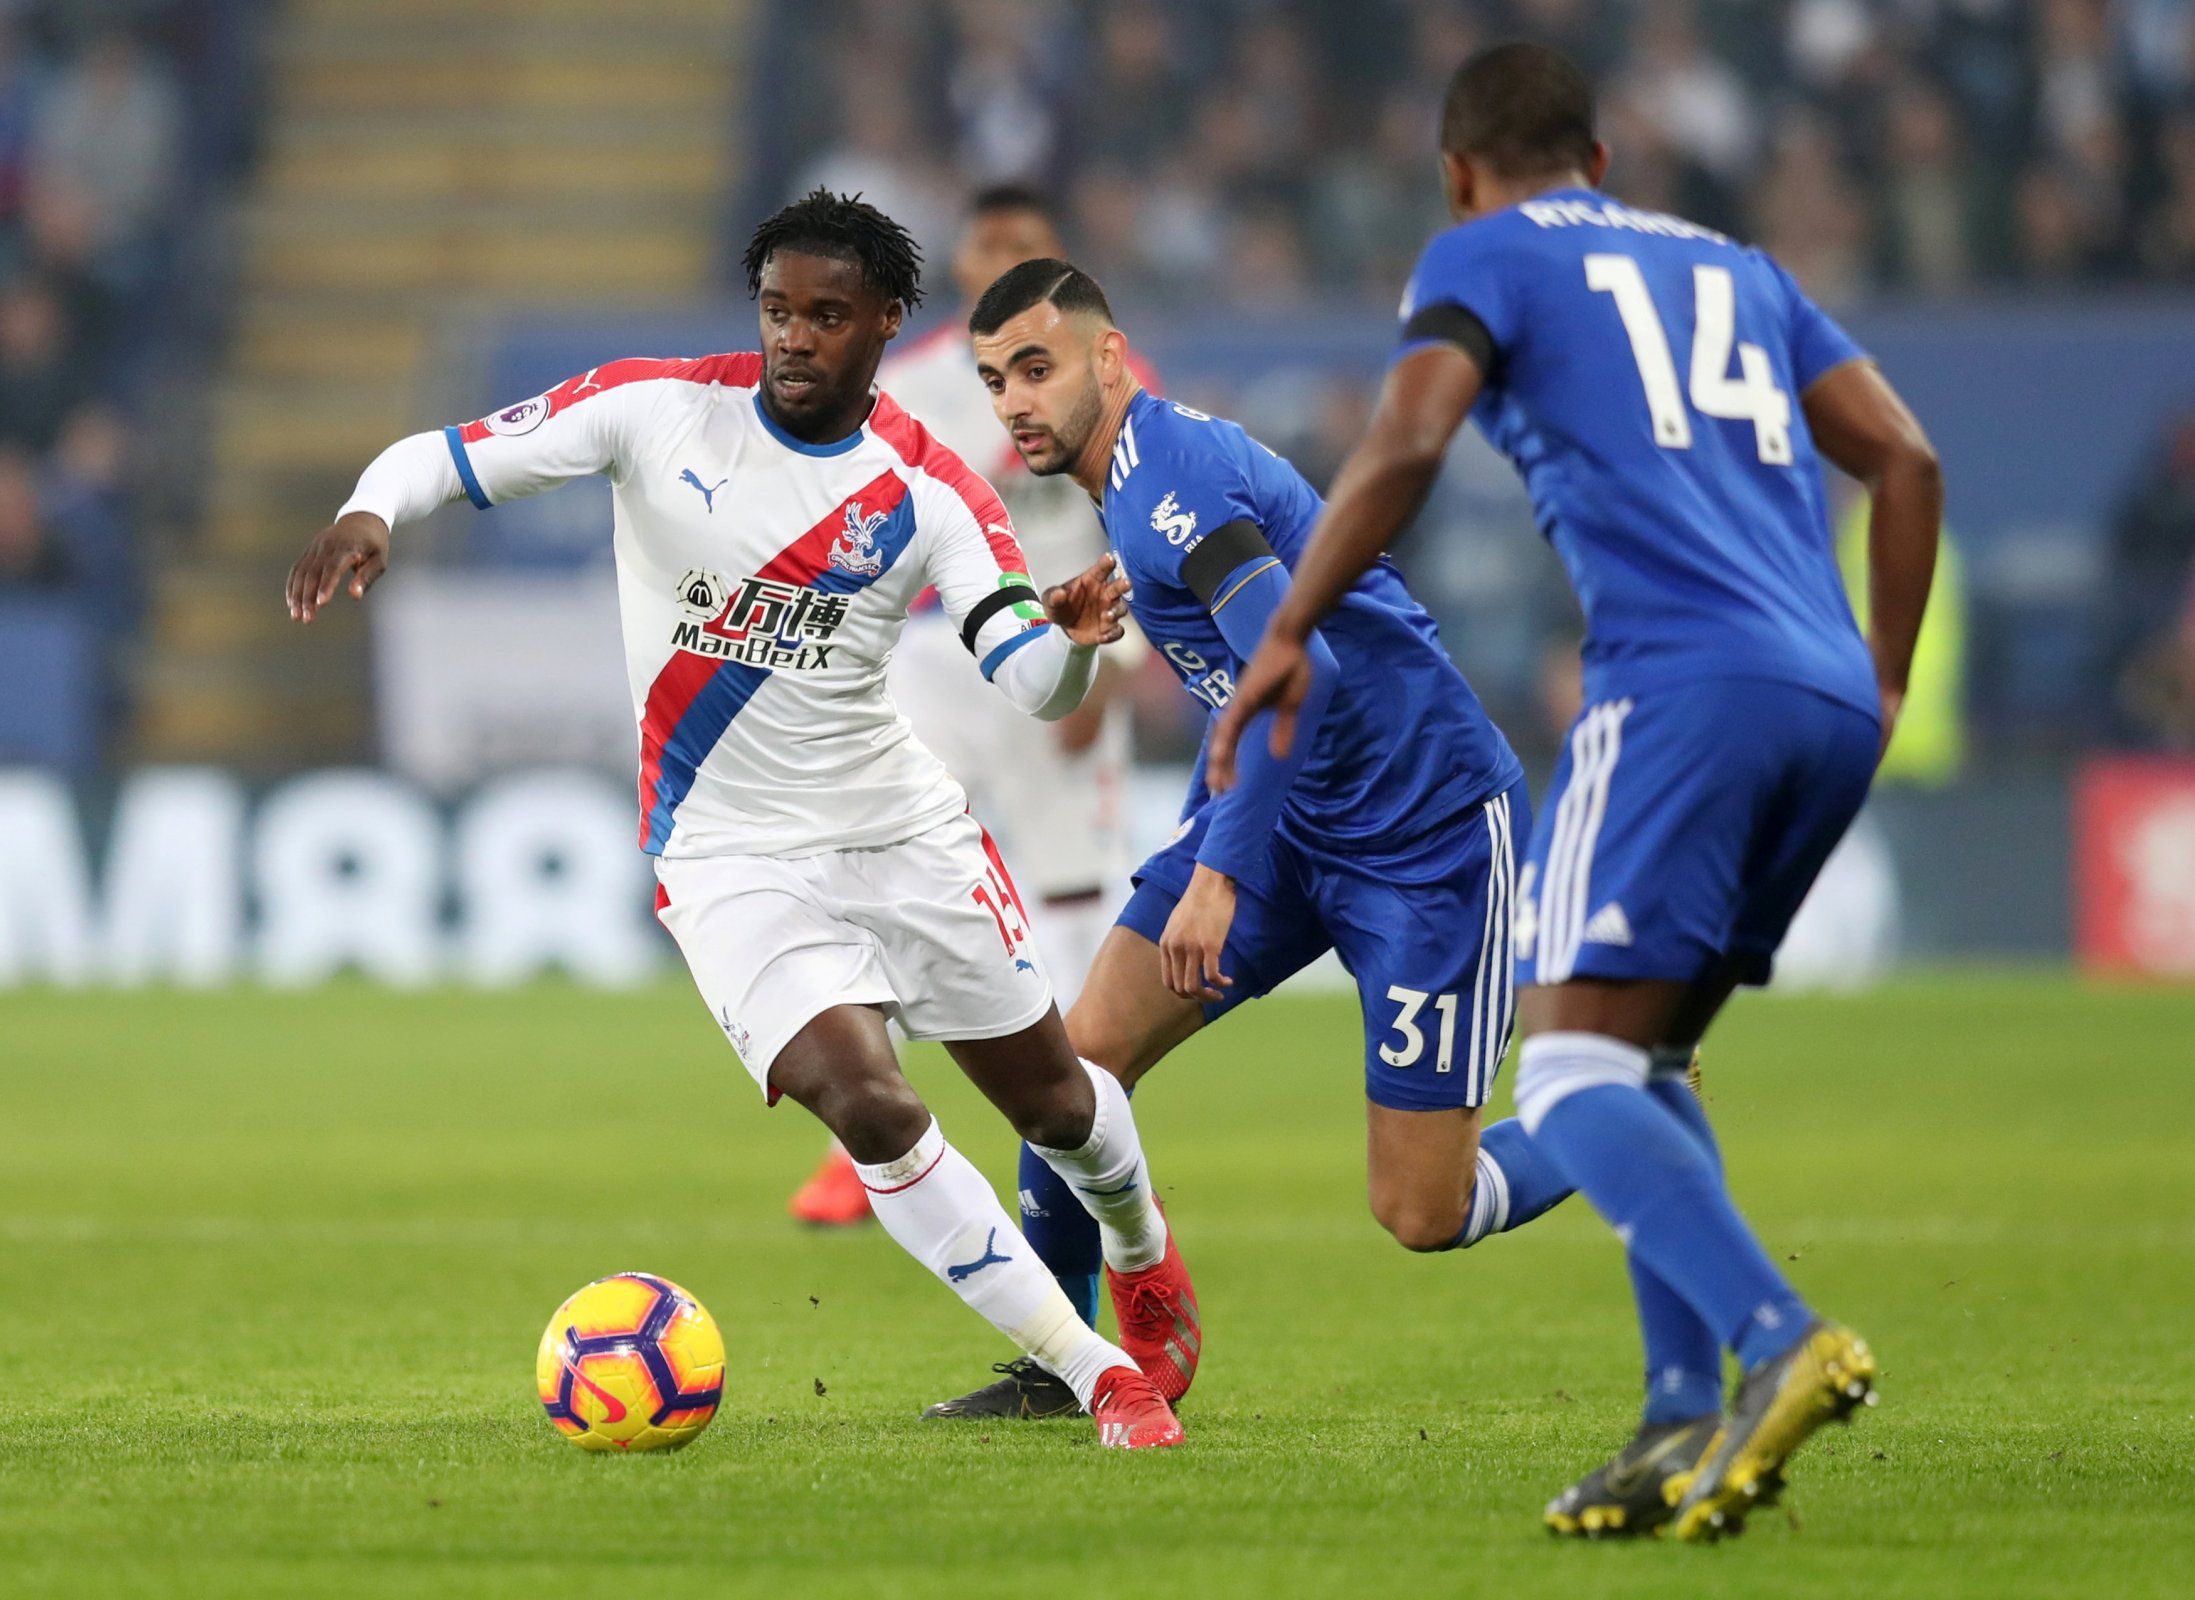 Crystal Palace midfielder Jeffrey Schlupp in action against Leicester City